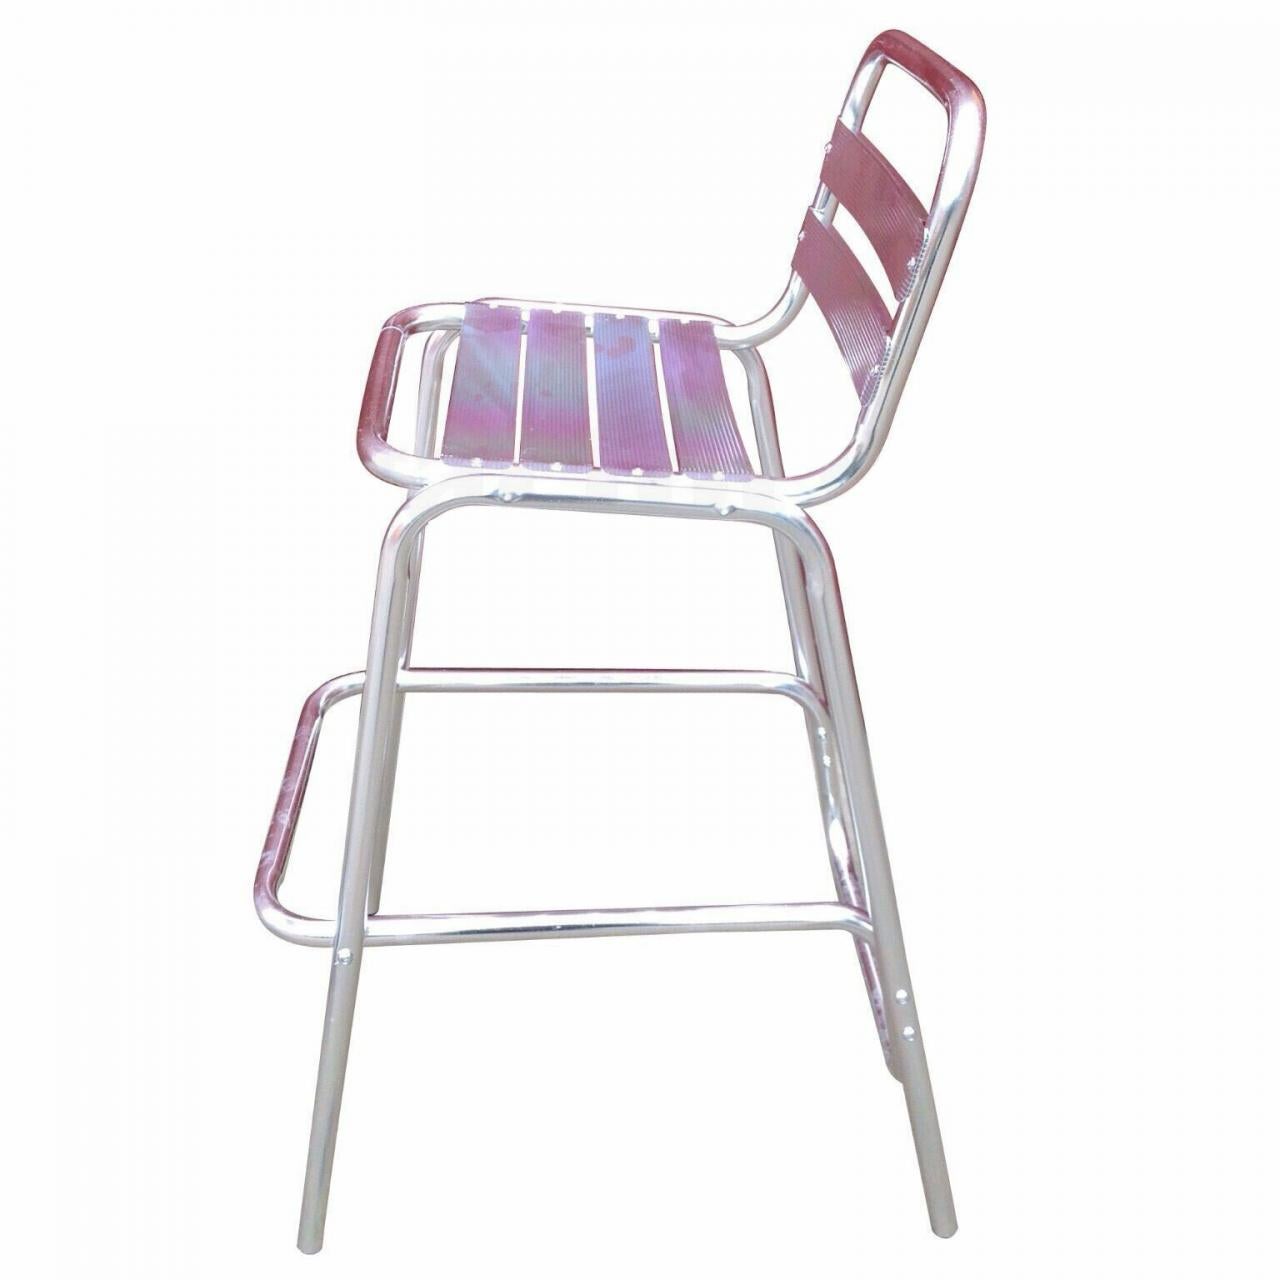 Bar Chair High Back Commercial Aluminium Restaurant Cafe Pool Outdoor New Series